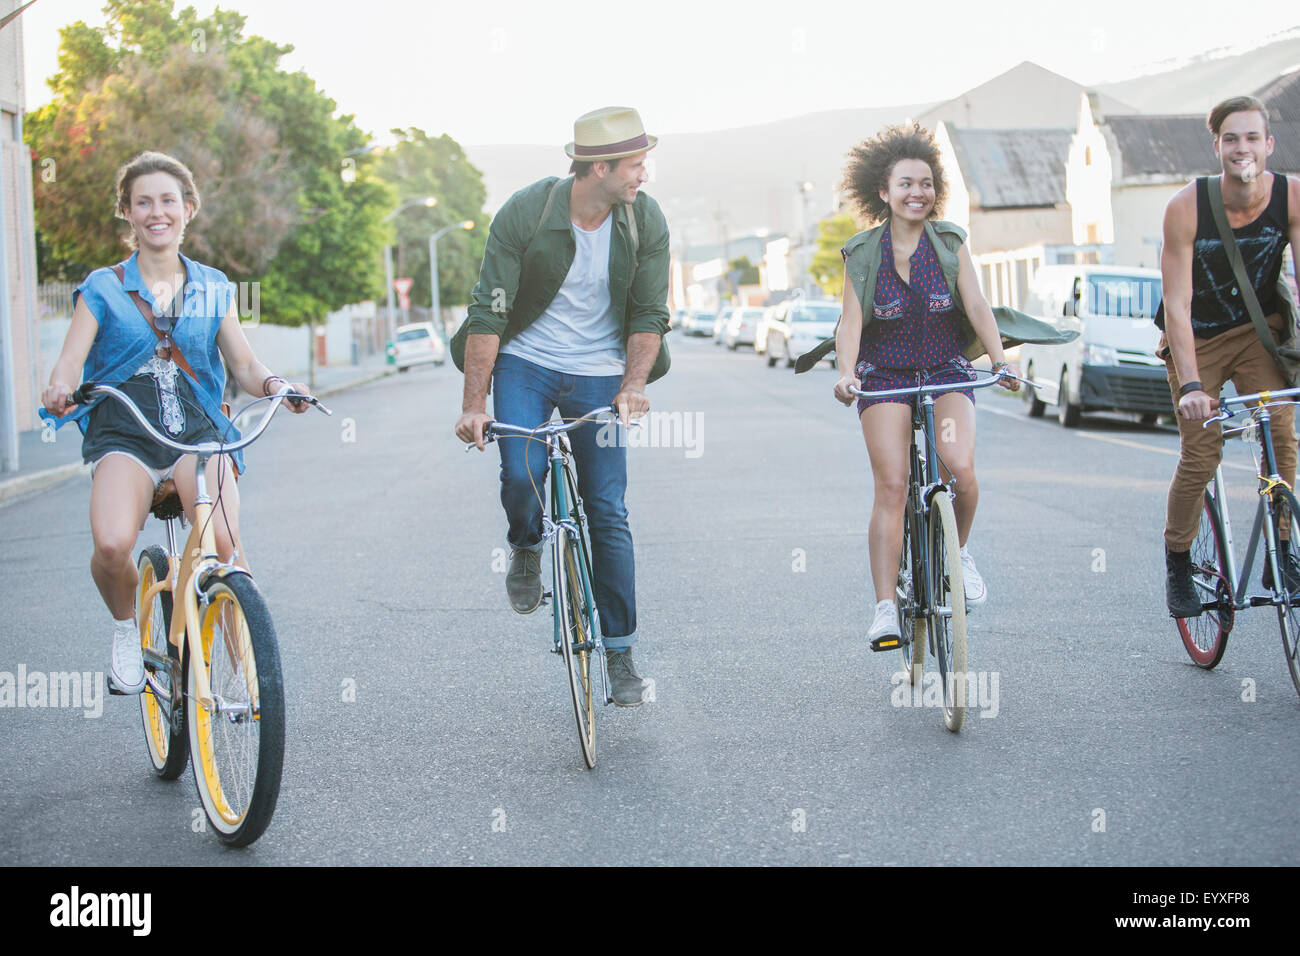 Friends riding bicycles in a row on street Stock Photo